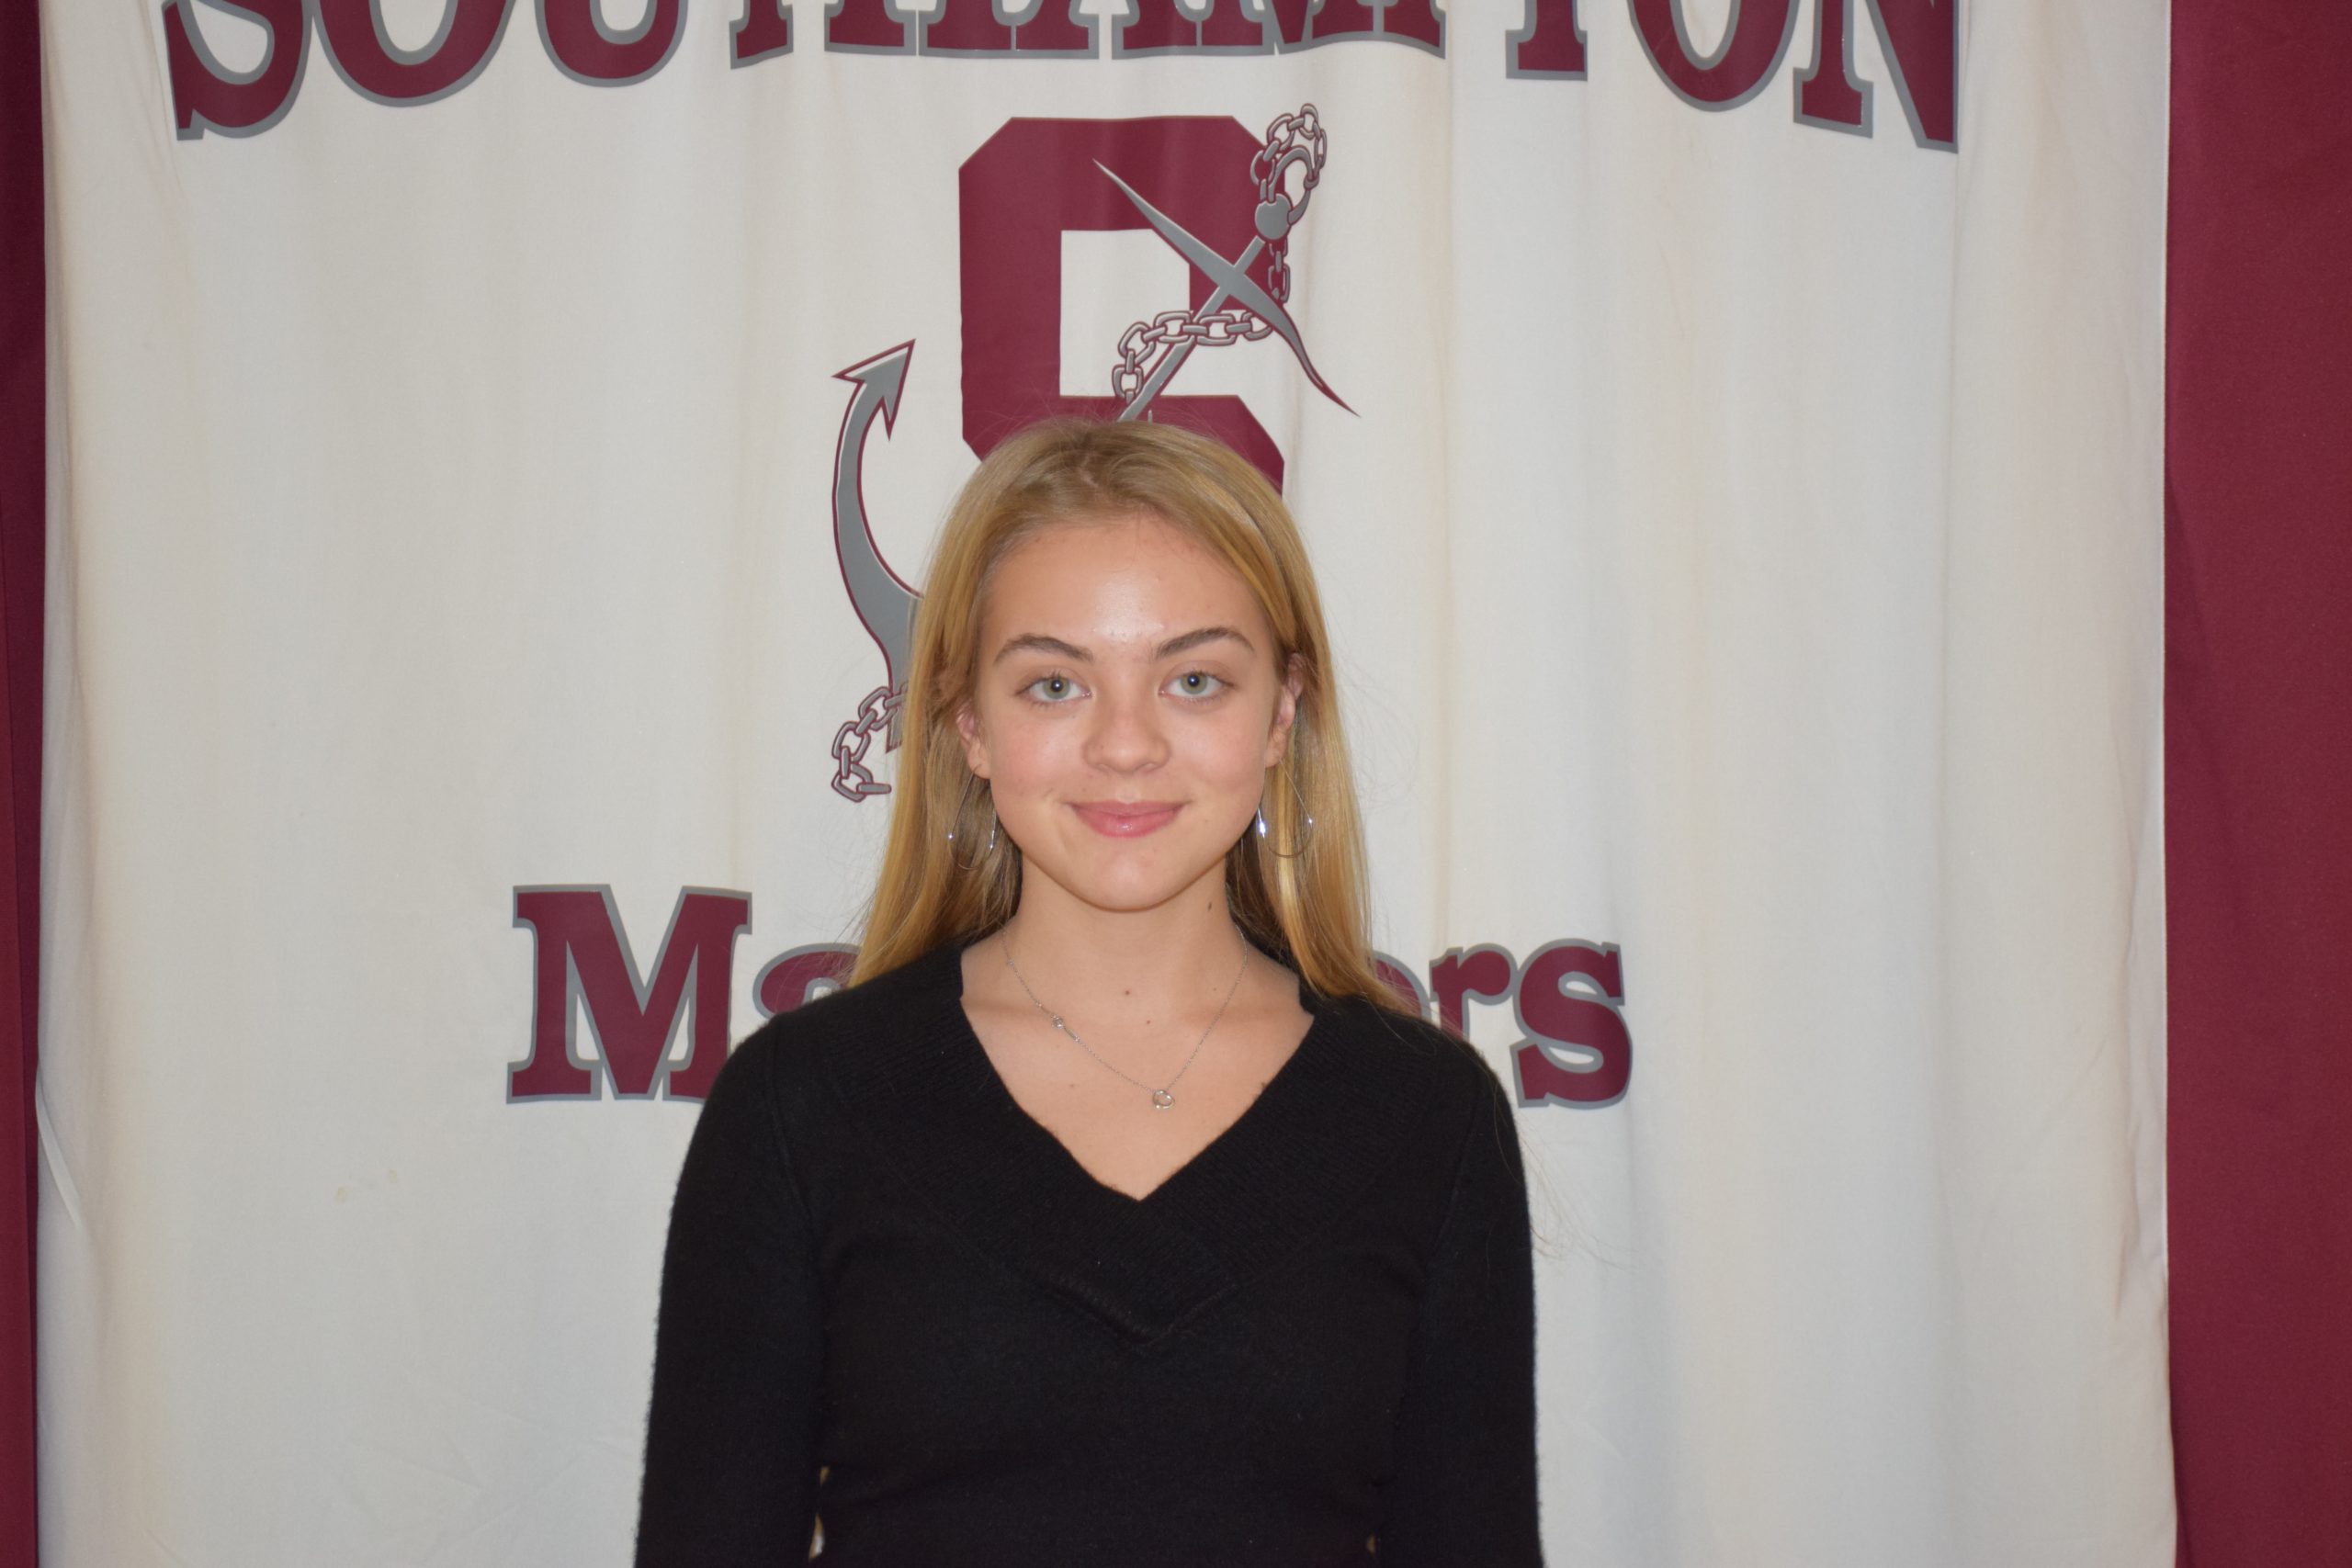 Southampton High School senior Isabella Ellams has been recognized by the Rotary Club of Southampton as the Rotary Student of the Month for January. Isabella earned the honor for her dedication to her studies and school community. She is a member of the National Honor Society, Chess Club, Integrity Club, Varsity Club and SADD club and participates in the International Spanish Academy. A multisport athlete, she captains the varsity tennis team, plays softball and runs track and field. Outside of school, she enjoys surfing, skateboarding, photography and the culinary arts. She plans to attend college on a pre-med track in the fall. 